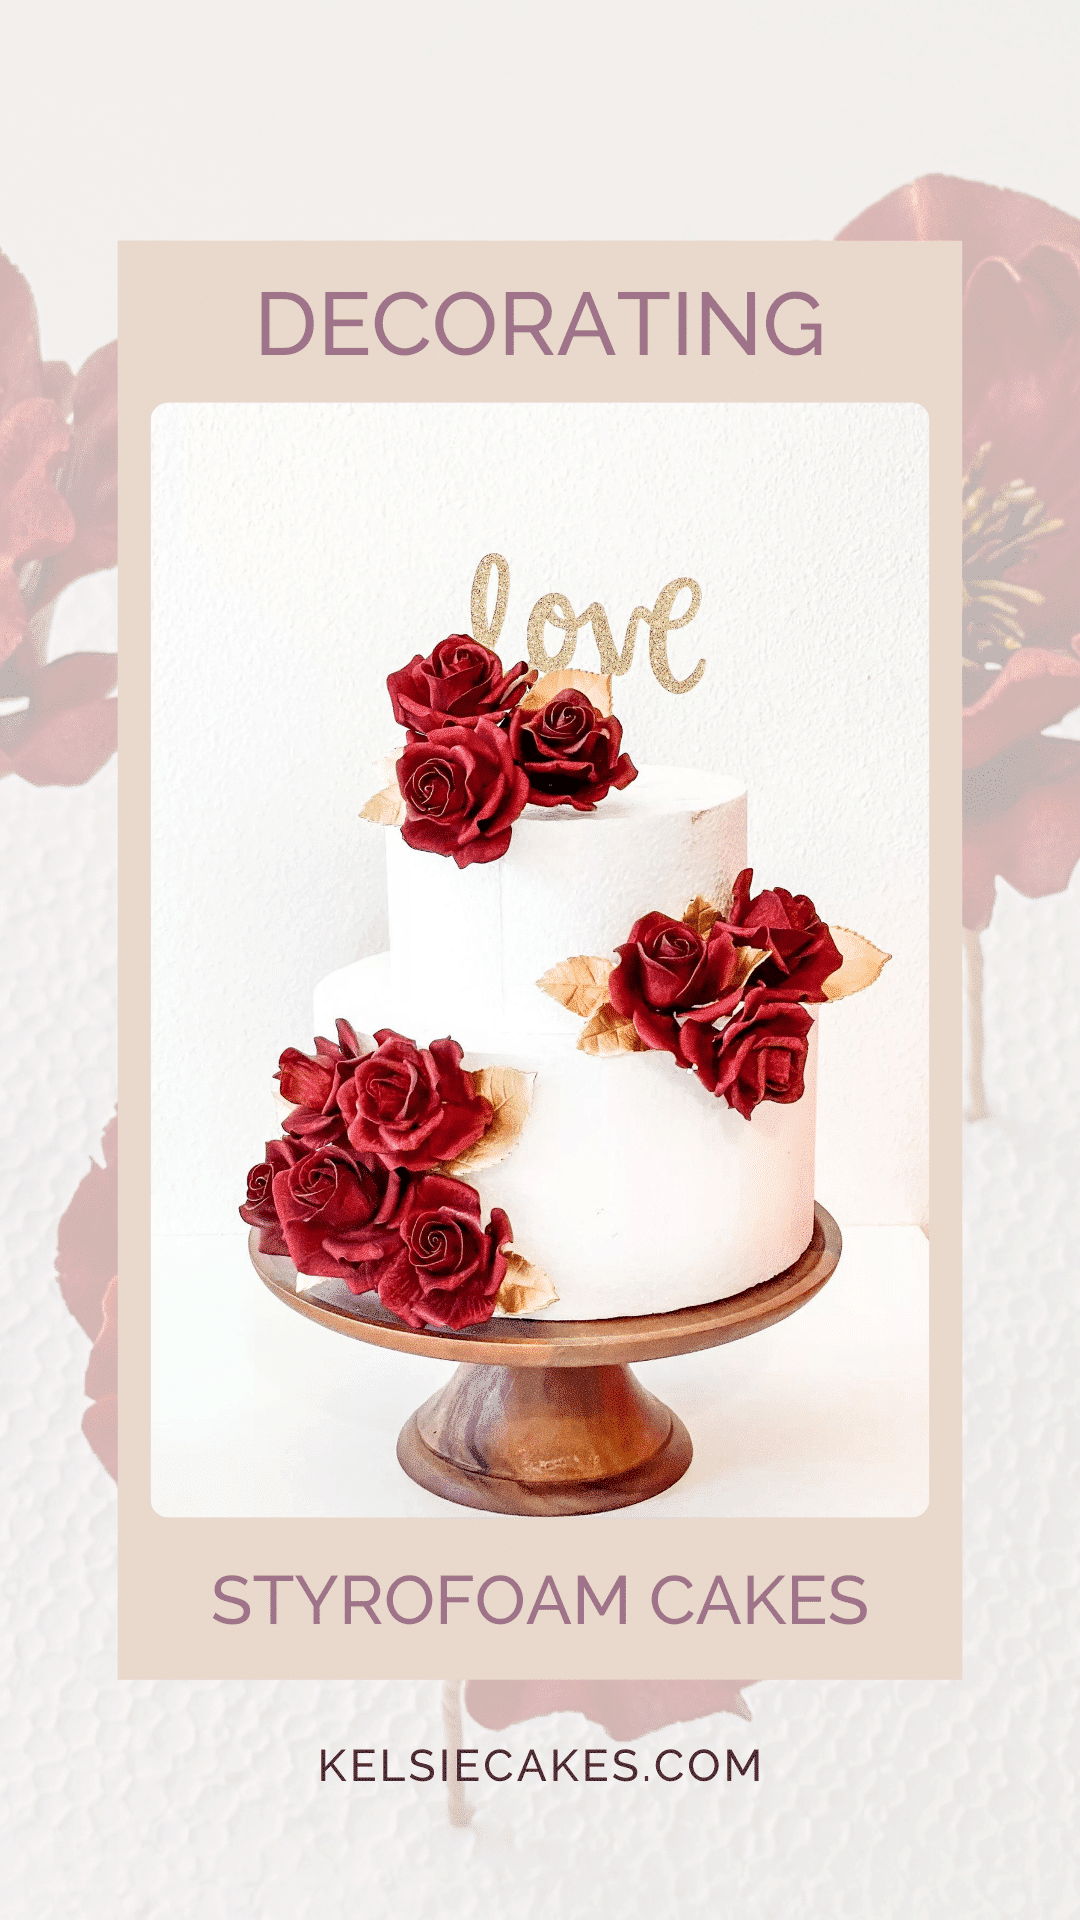 Image of a styrofoam cake decorated with red rose sugar flowers and gold leaves and a cake topper that says love with the text “decorating styrofoam cakes kelsiecakes.com”